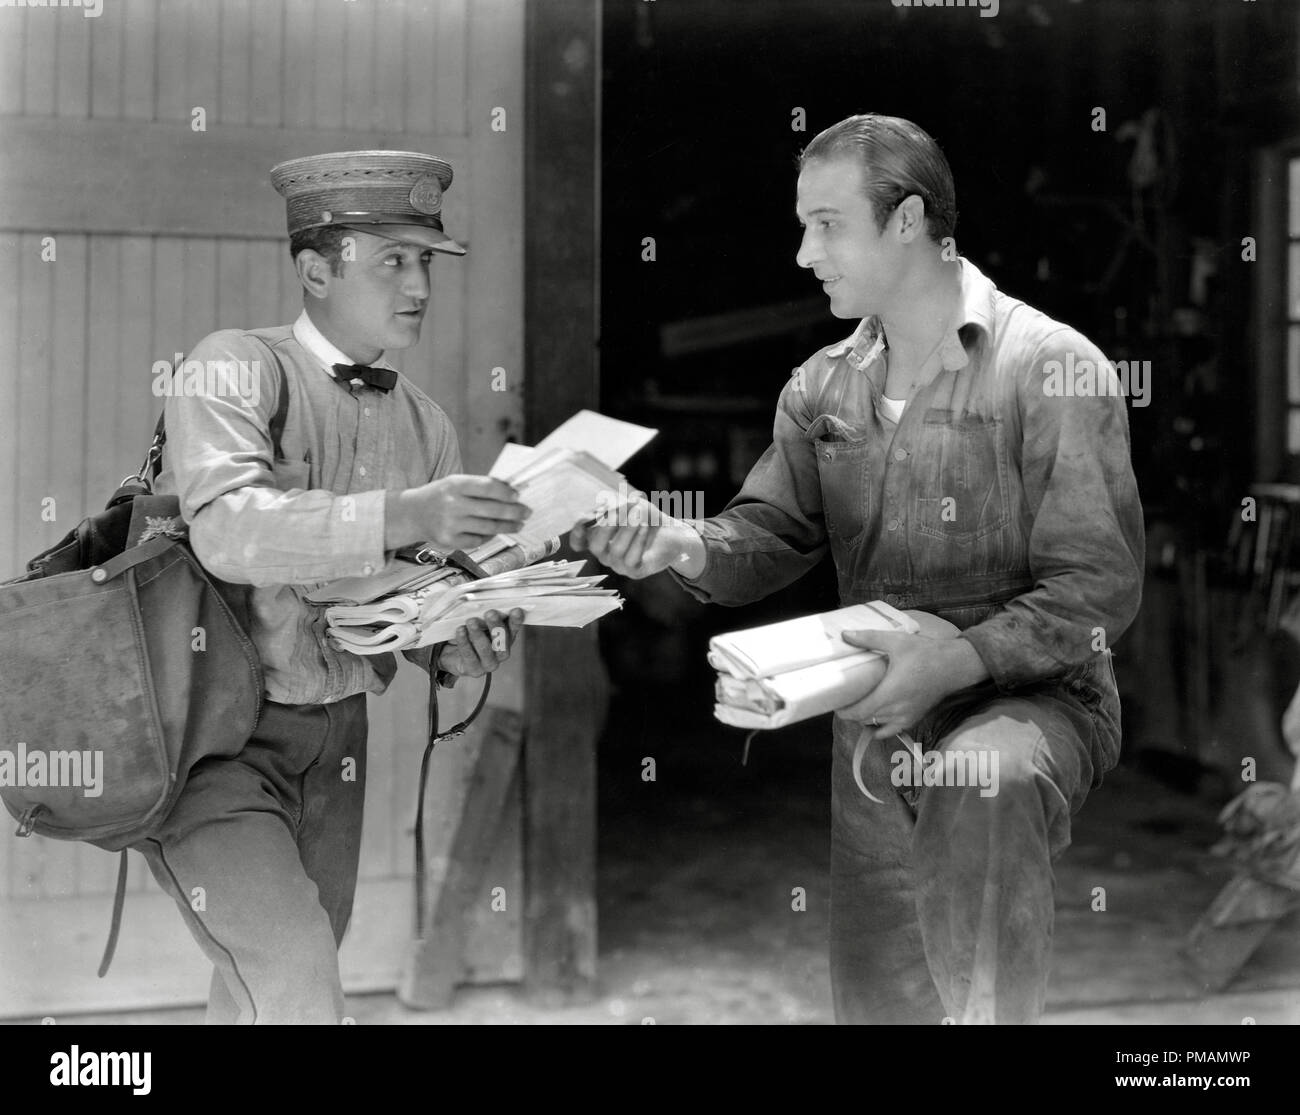 Rudolph getting his fan mail circa 1925 File Reference # 070THA For Editorial Use Only - All Rights Reserved Stock Photo Alamy